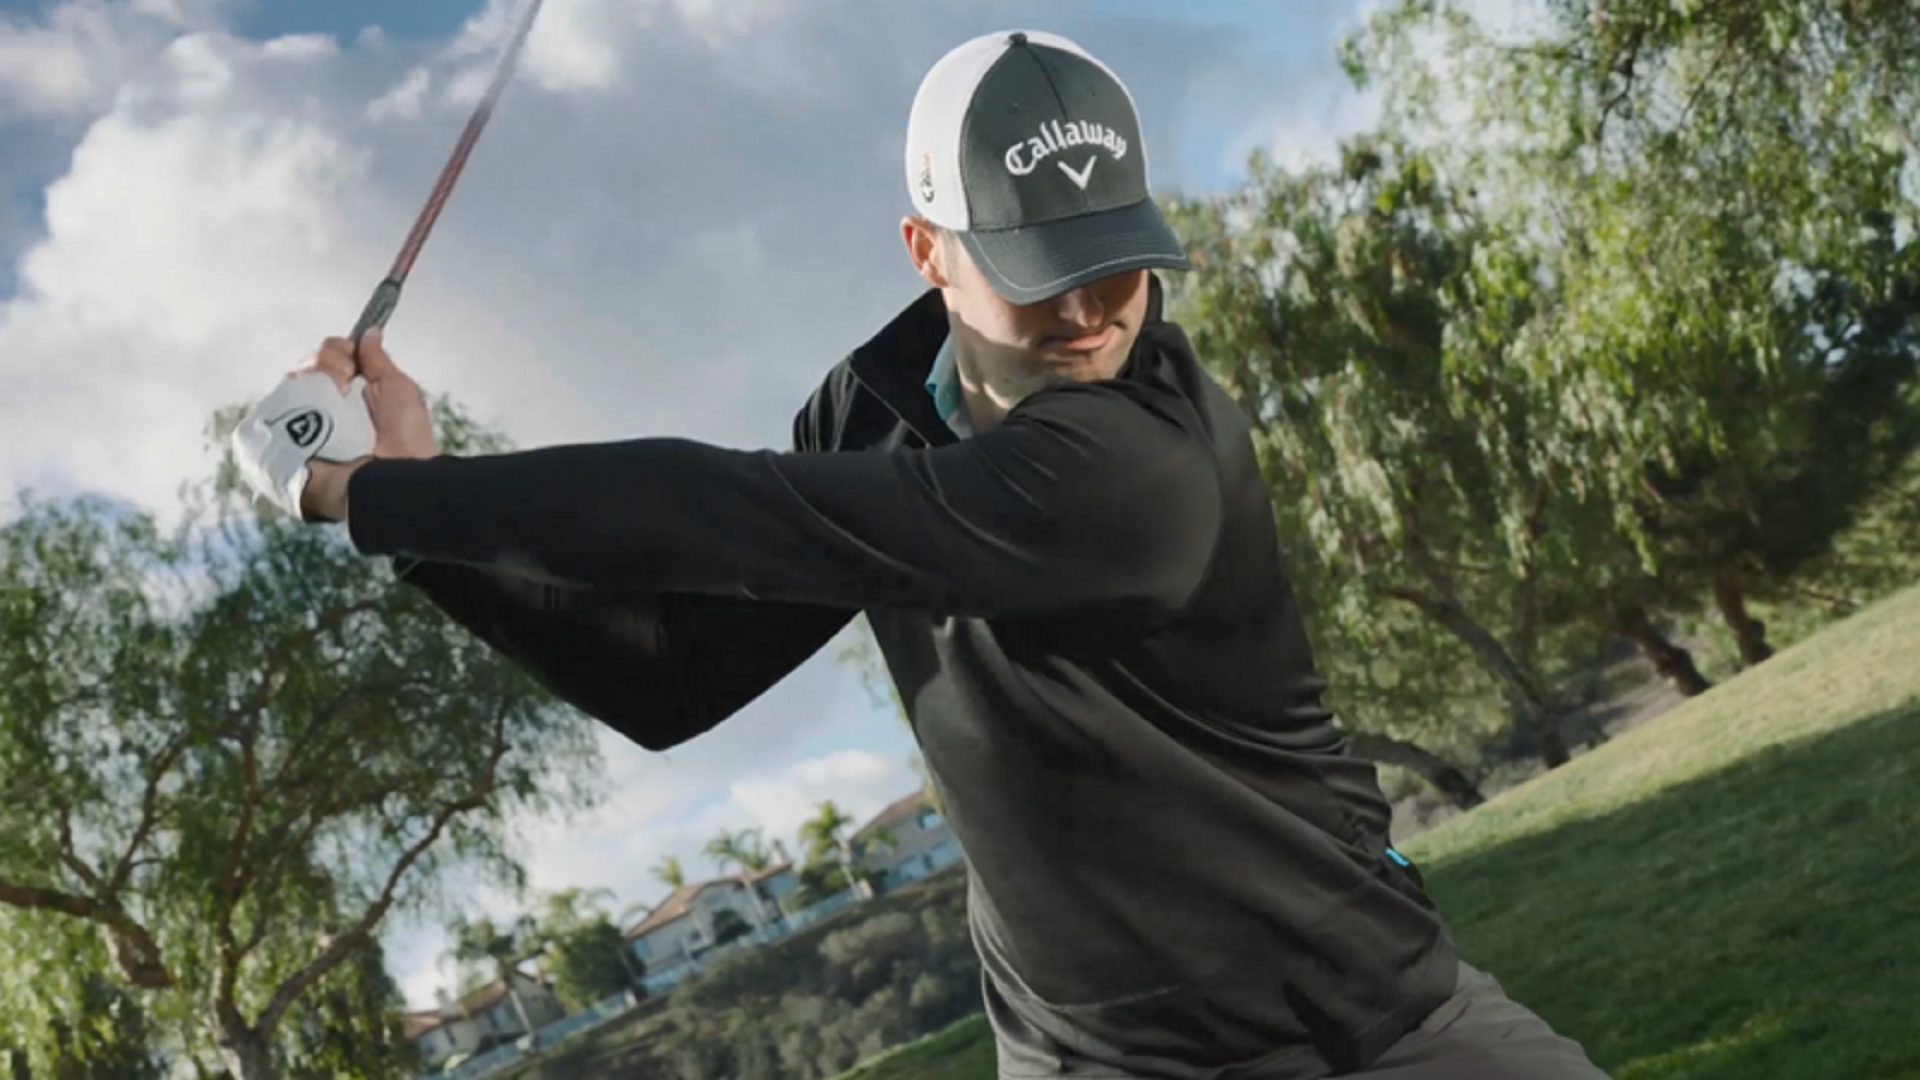 See How Callaway Golf Streamlines Product Development To Deliver Products That Lead The Market In Performance And Quality Siemens Software